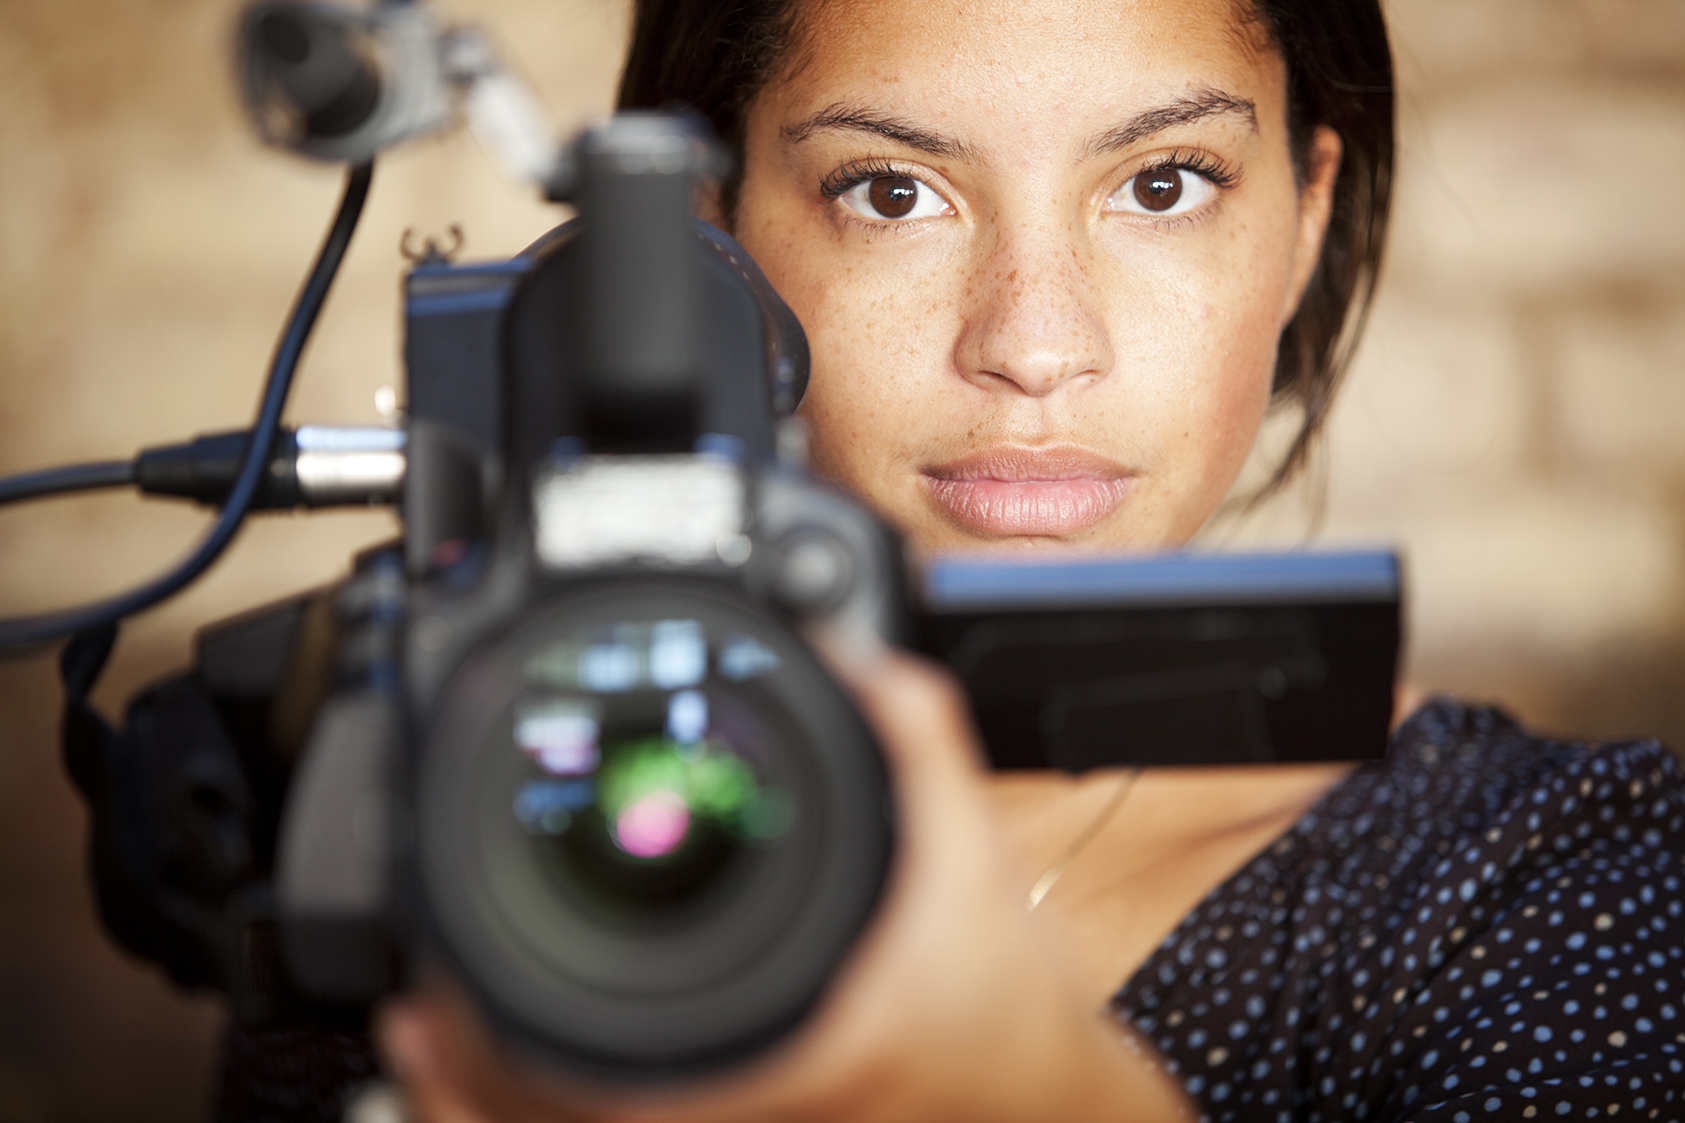 A confident glance from a video camera operator engaging eye contact with her subject during filming.